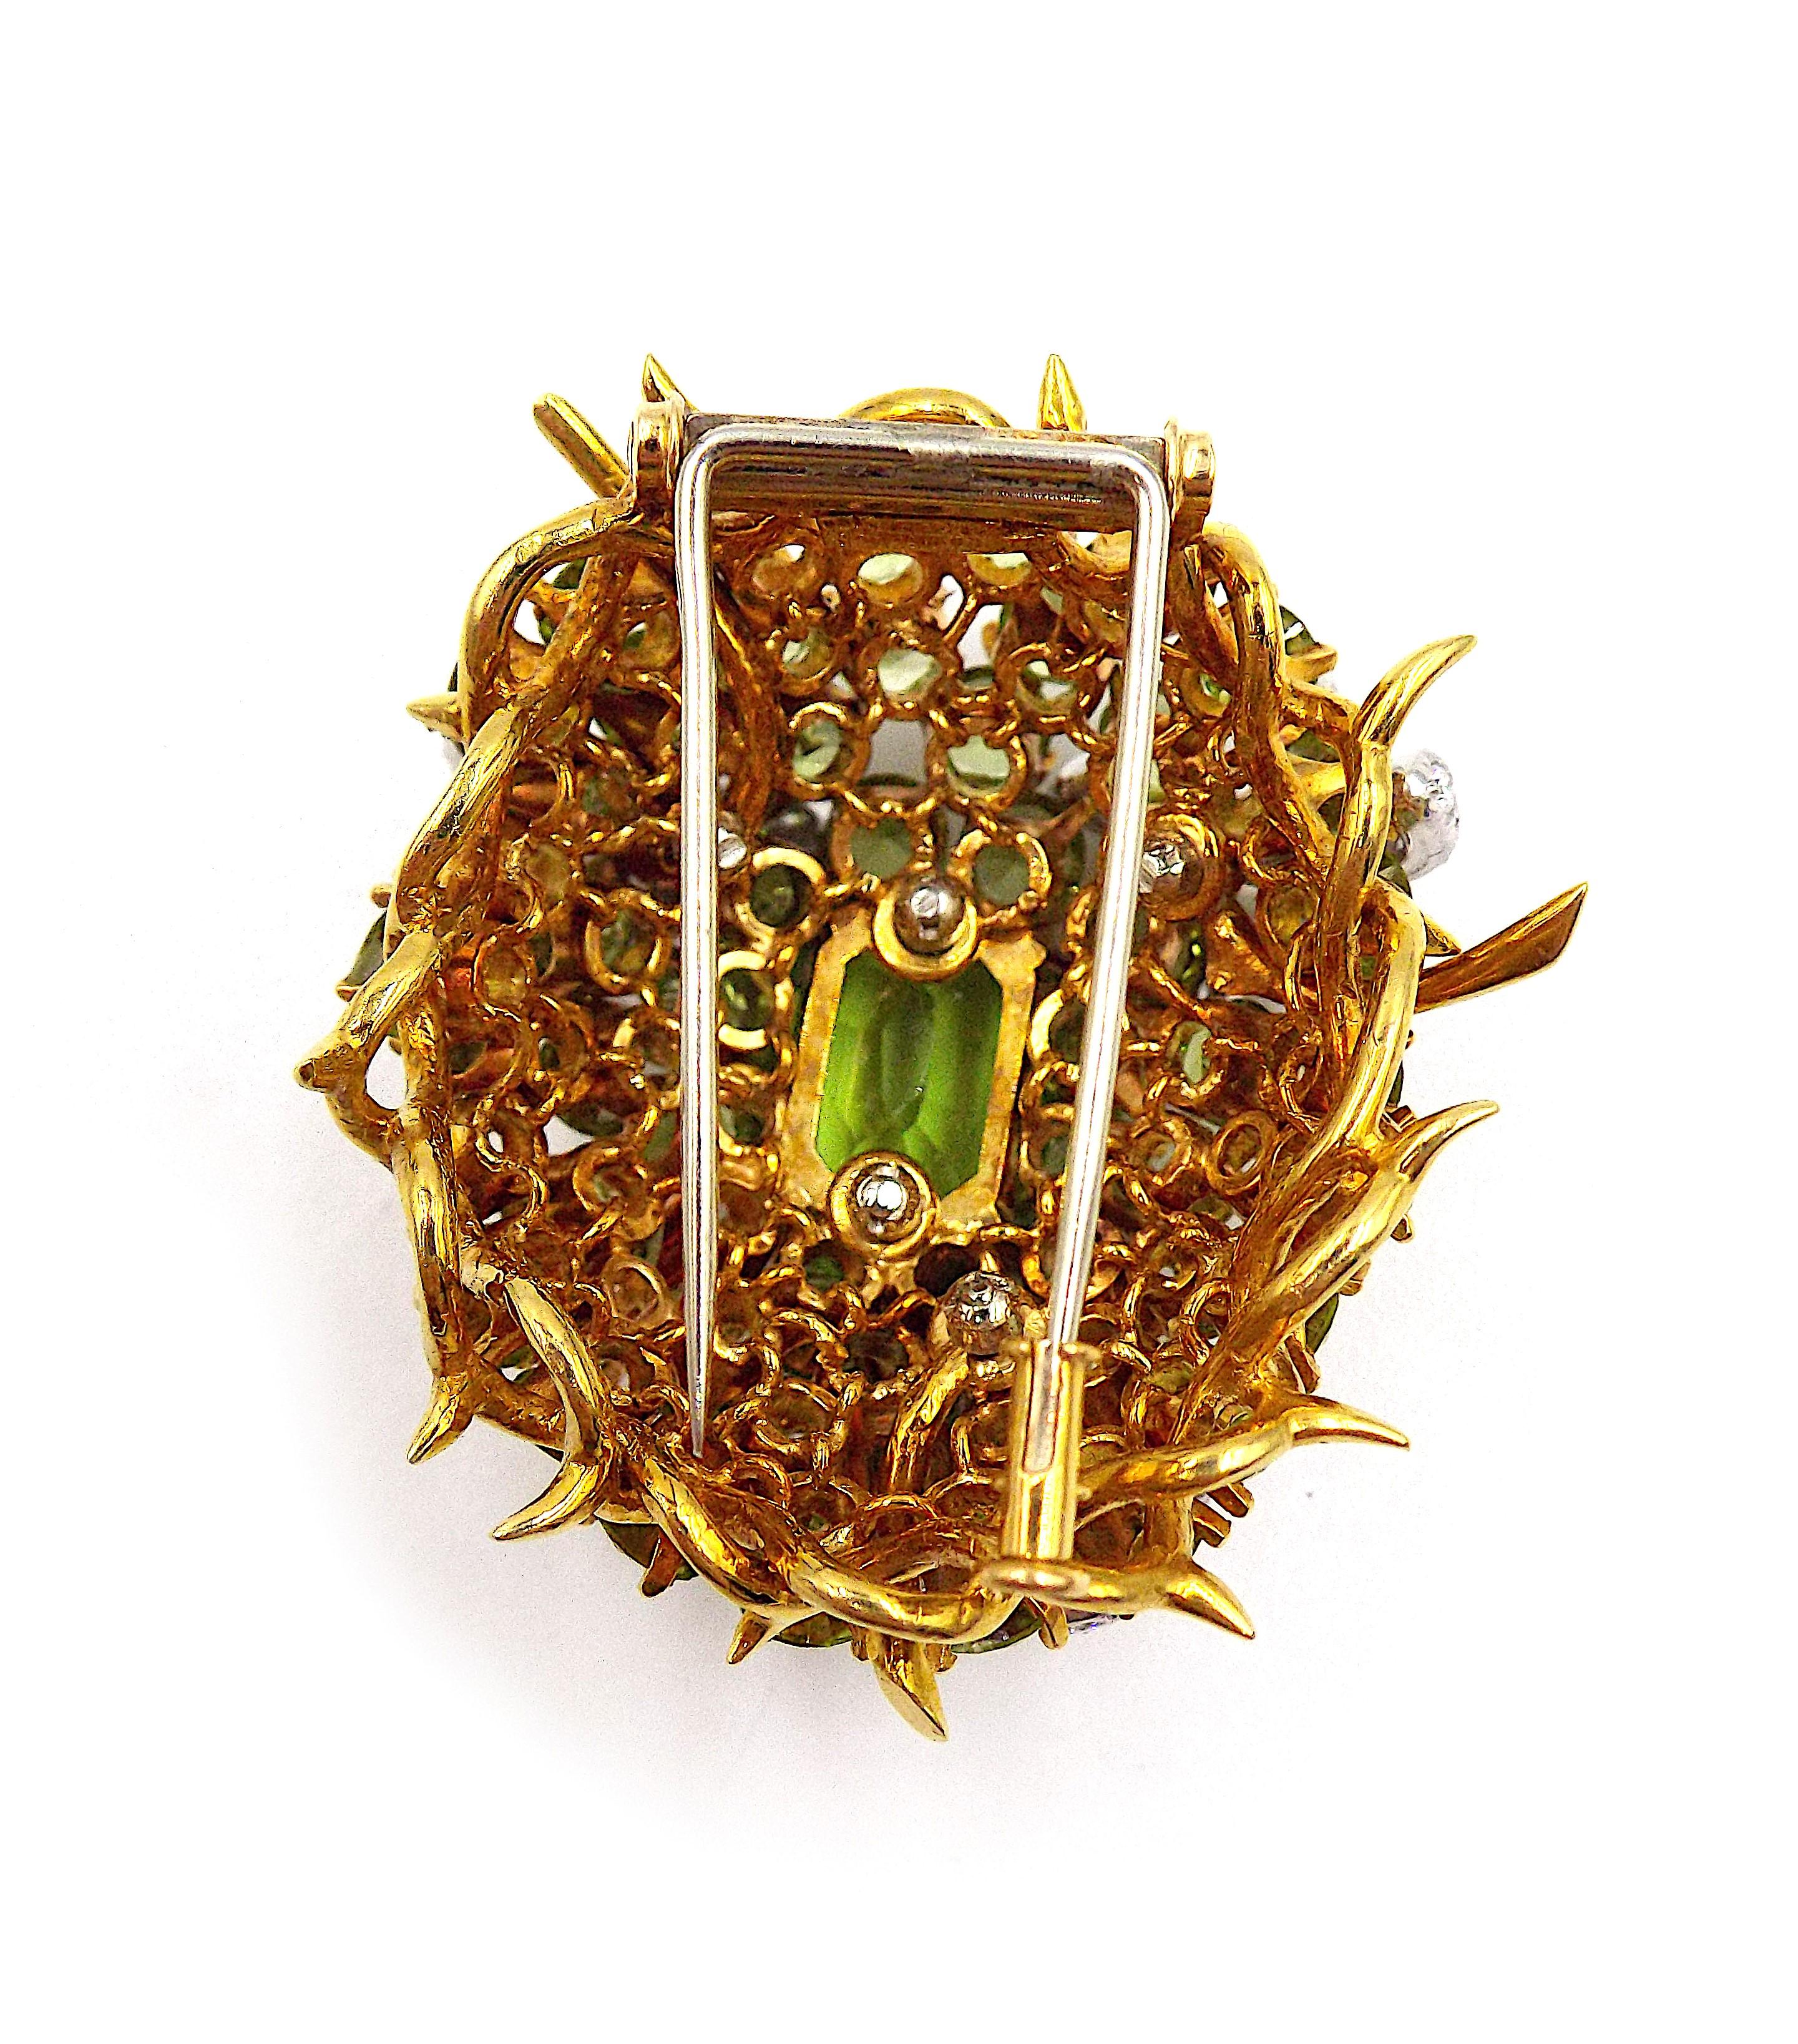 Centered on an oval-shaped peridot, set within a domed surround of round peridots, embellished with three flowerheads, the petals pavé-set with round diamonds, within a border of thorny branches. Center peridot weighs approximately 5.65 carats.